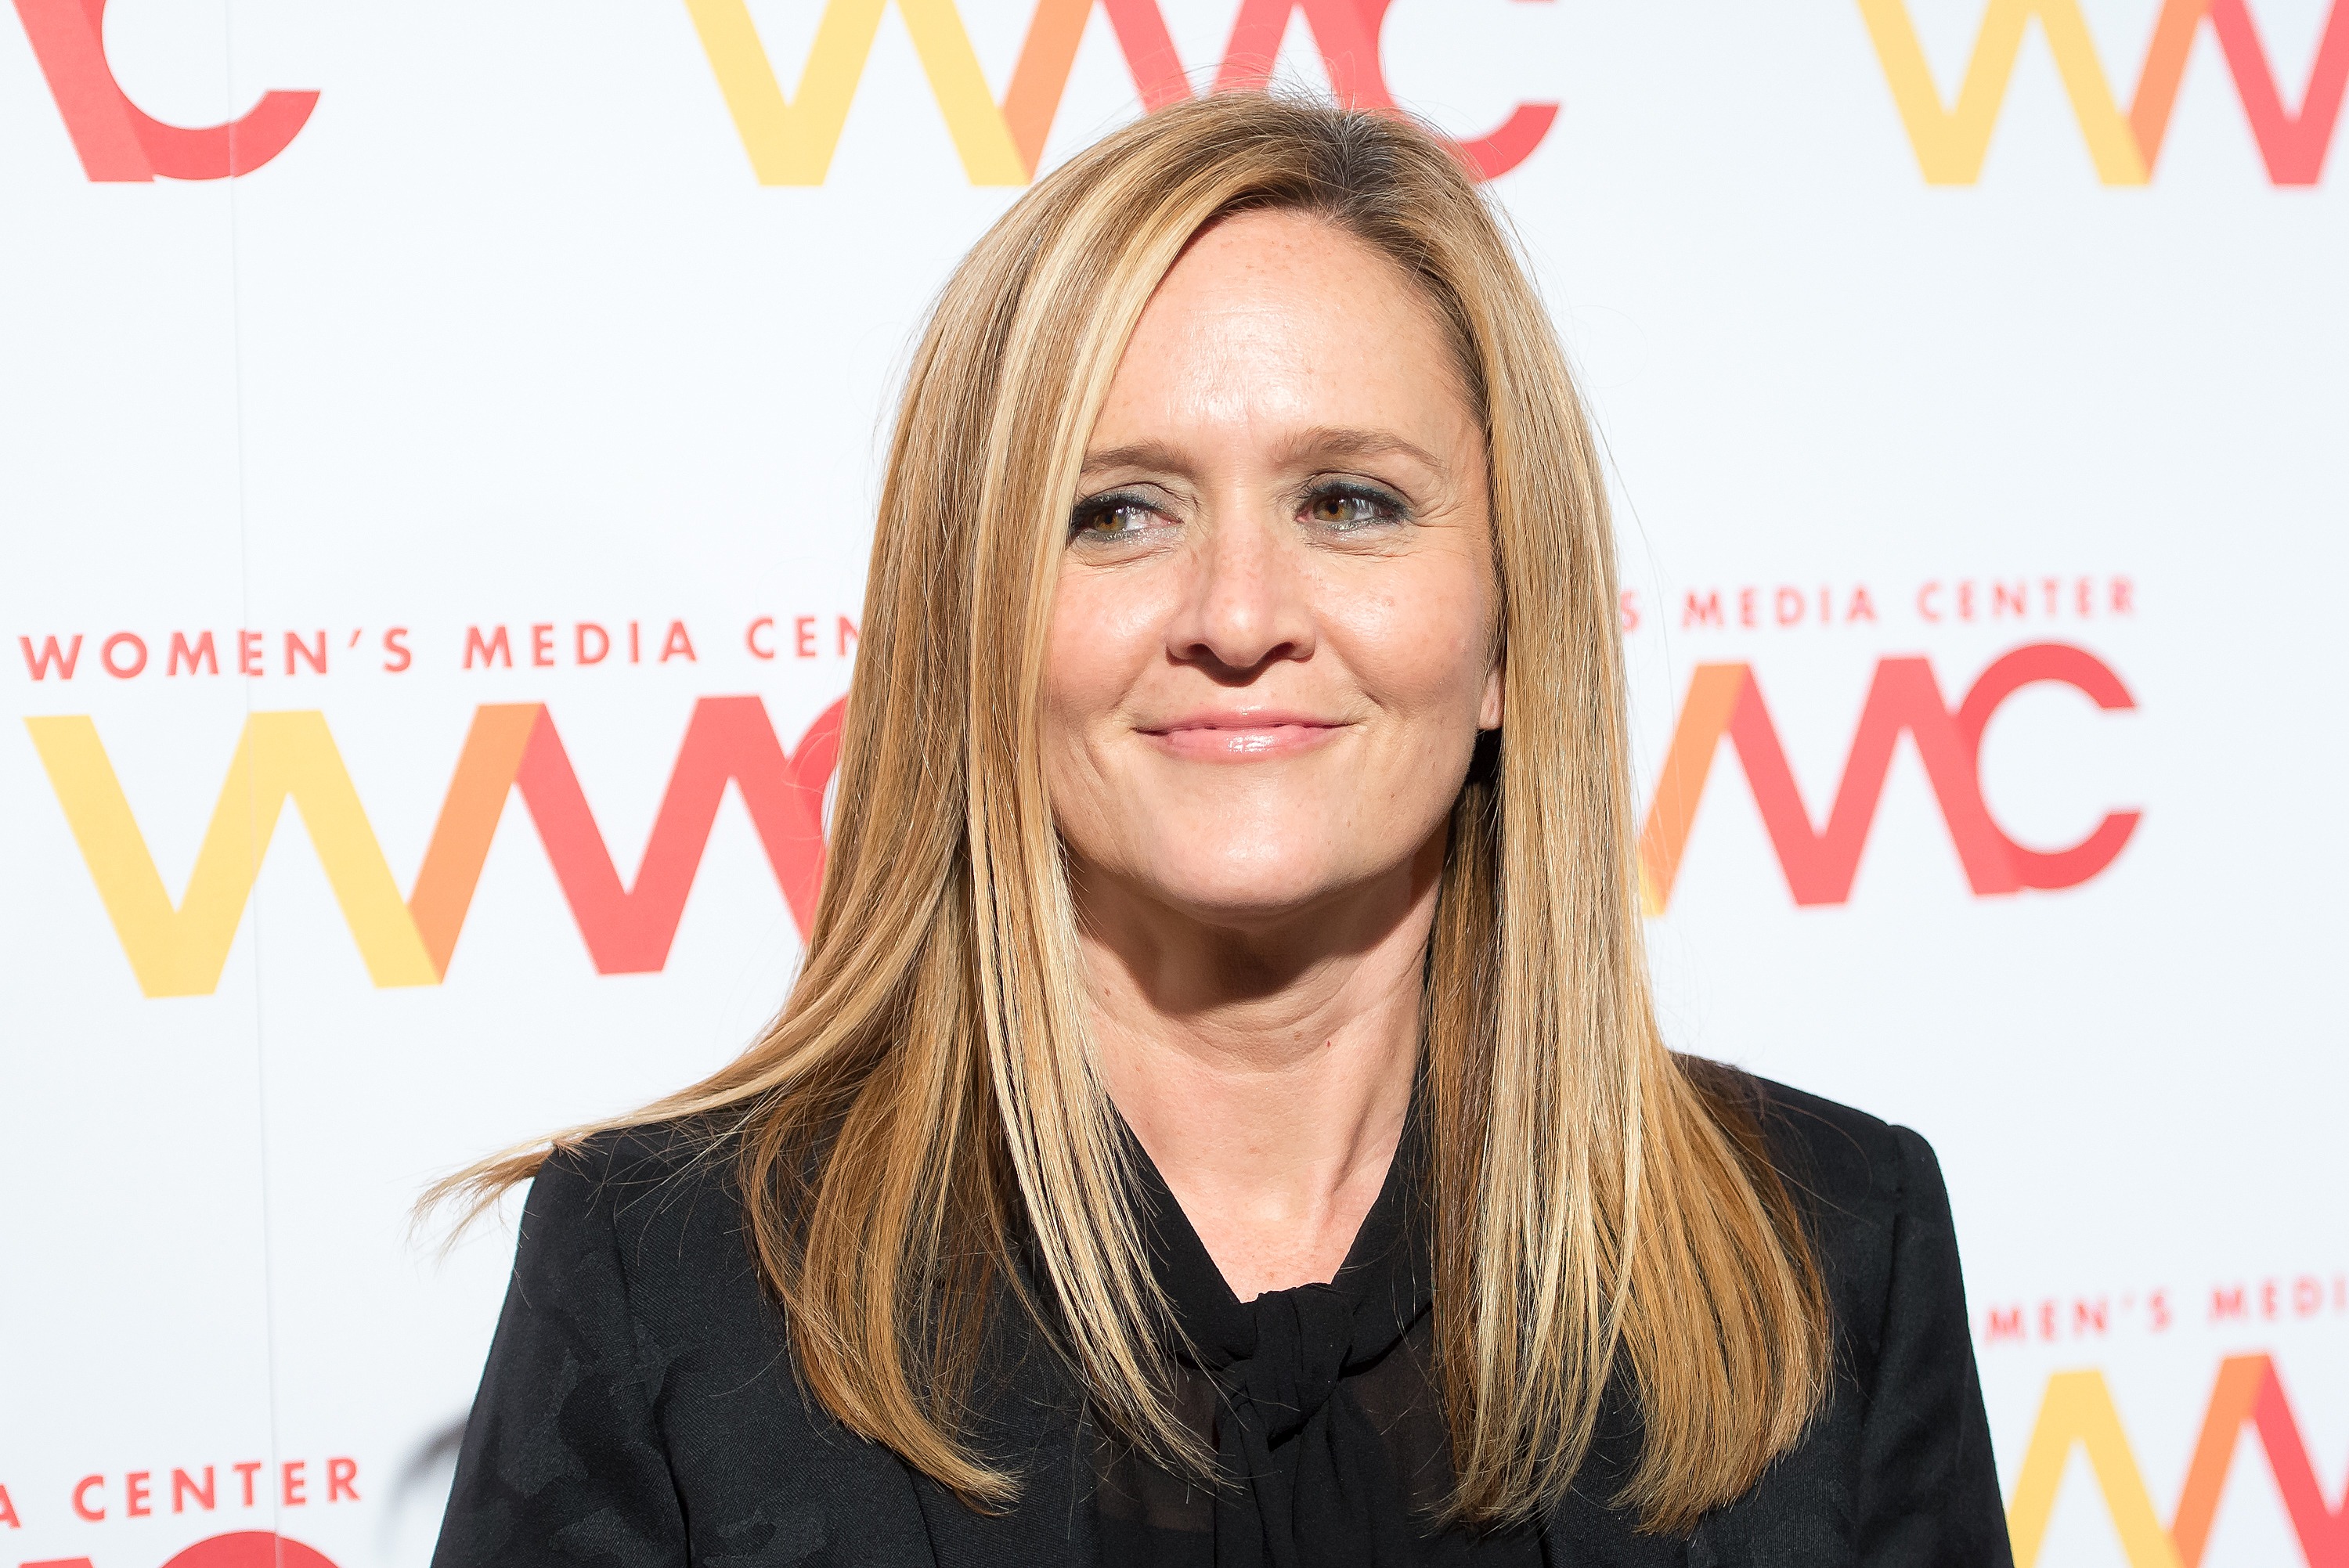 Samantha Bee attends The Women's Media Center 2016 Women's Media Awards at Capitale on Sept. 29, 2016 in New York City. (Mike Pont—WireImage)